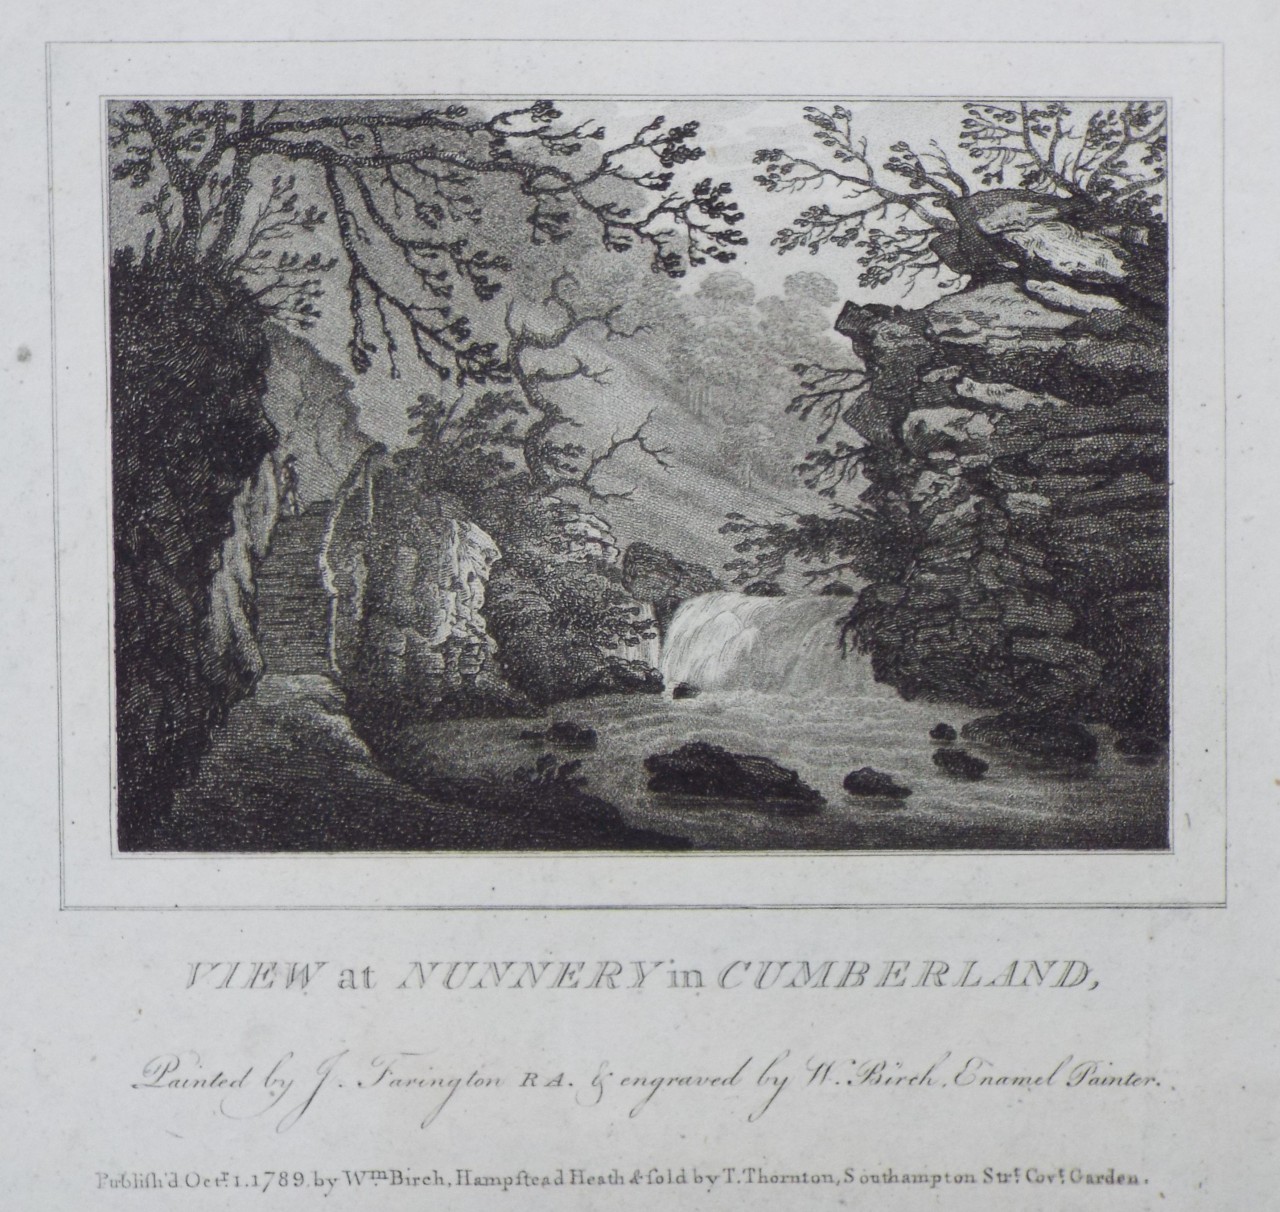 Print - View at Nunnery in Cumberland. - Birch